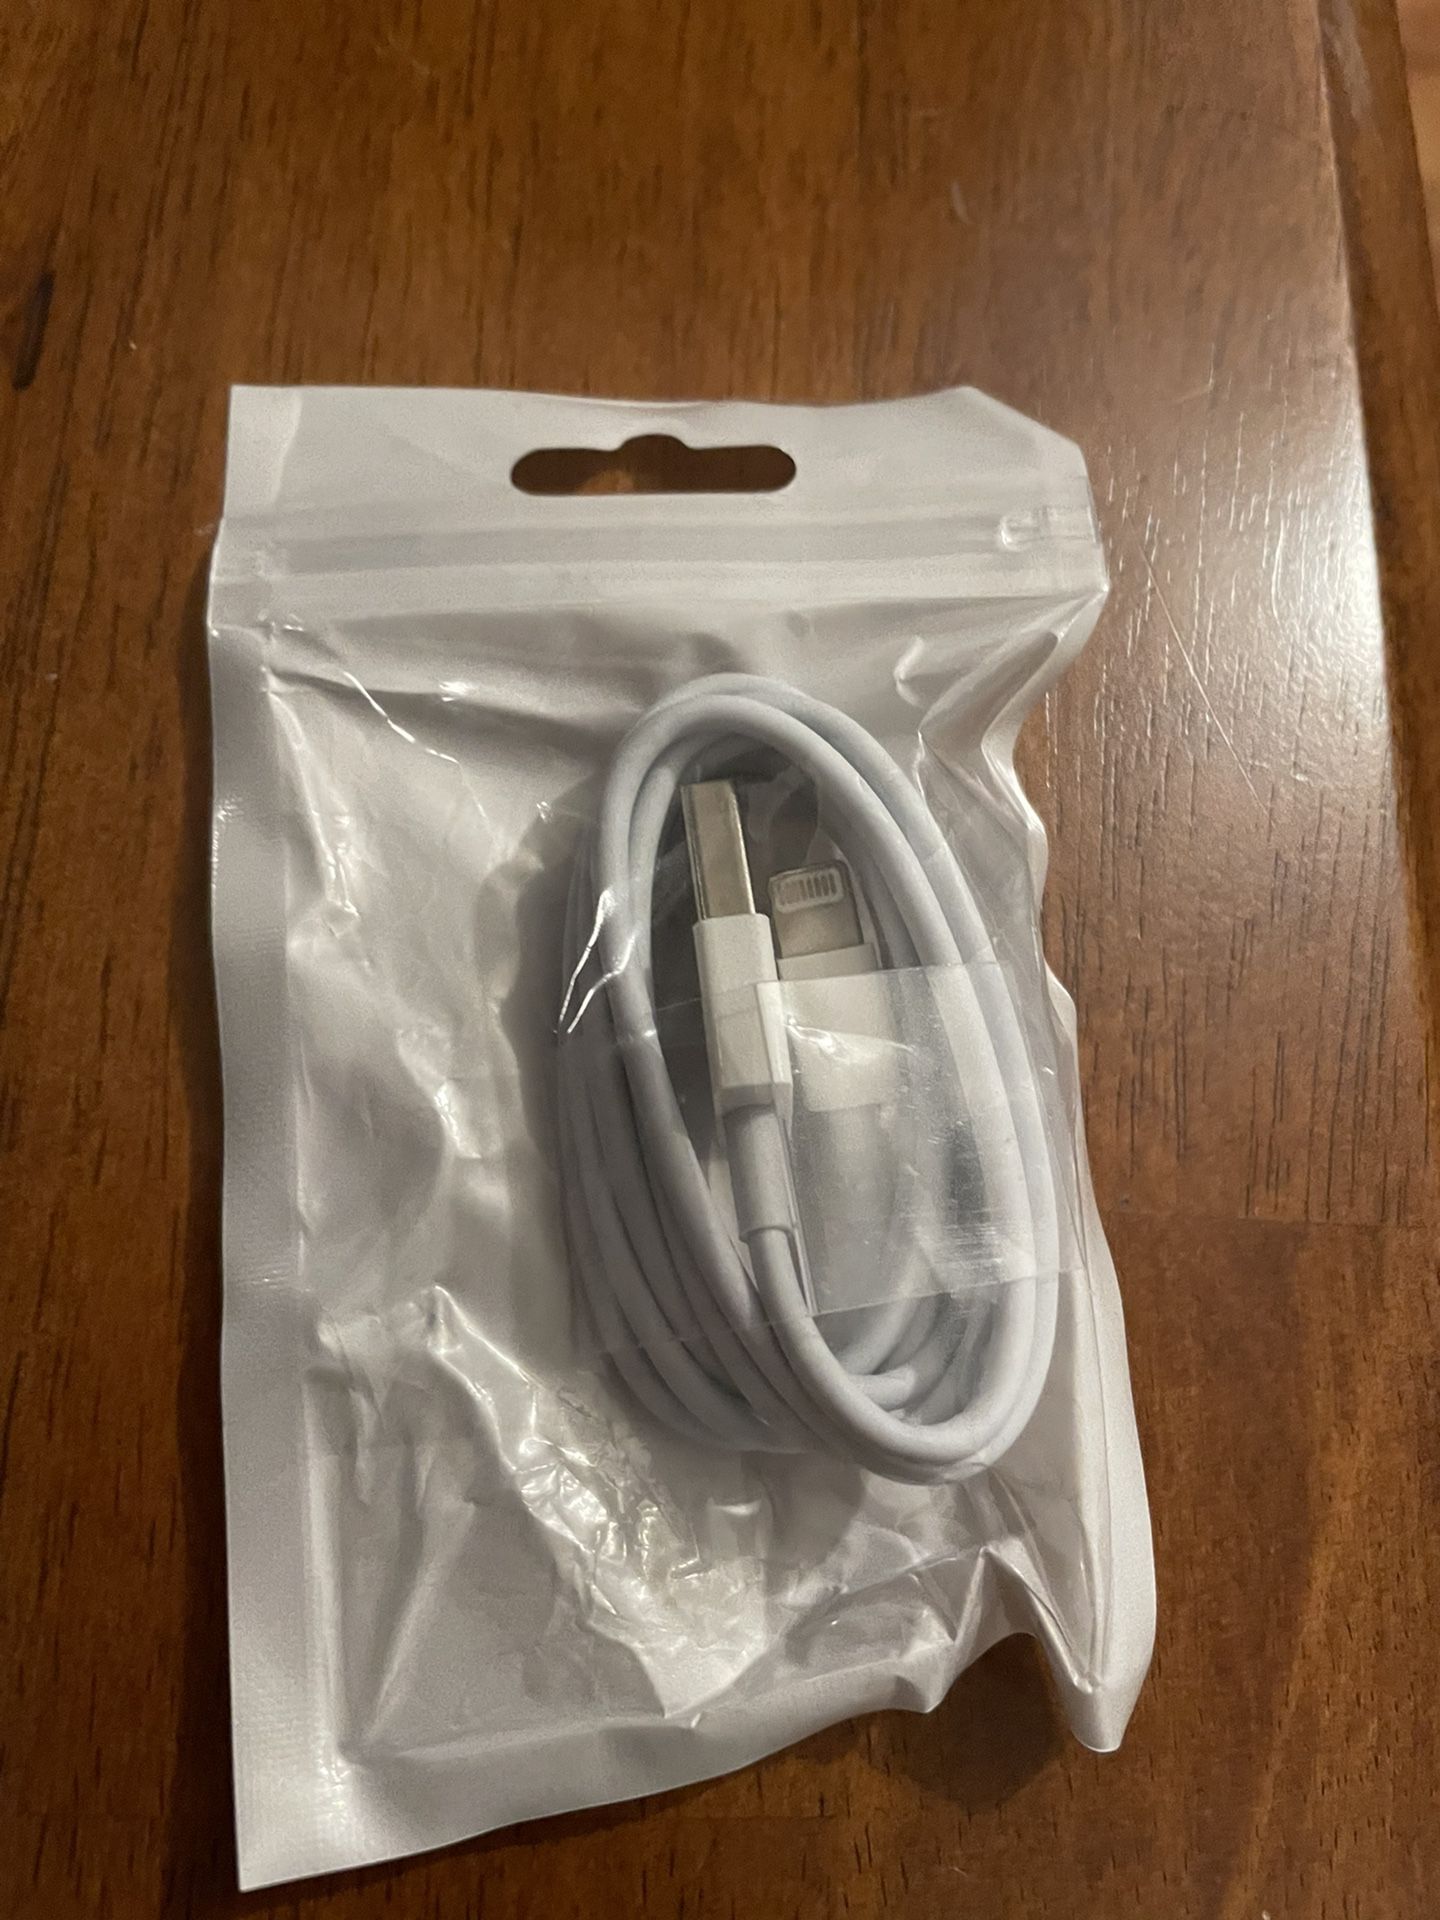 iPhone Charge Cord 3mm